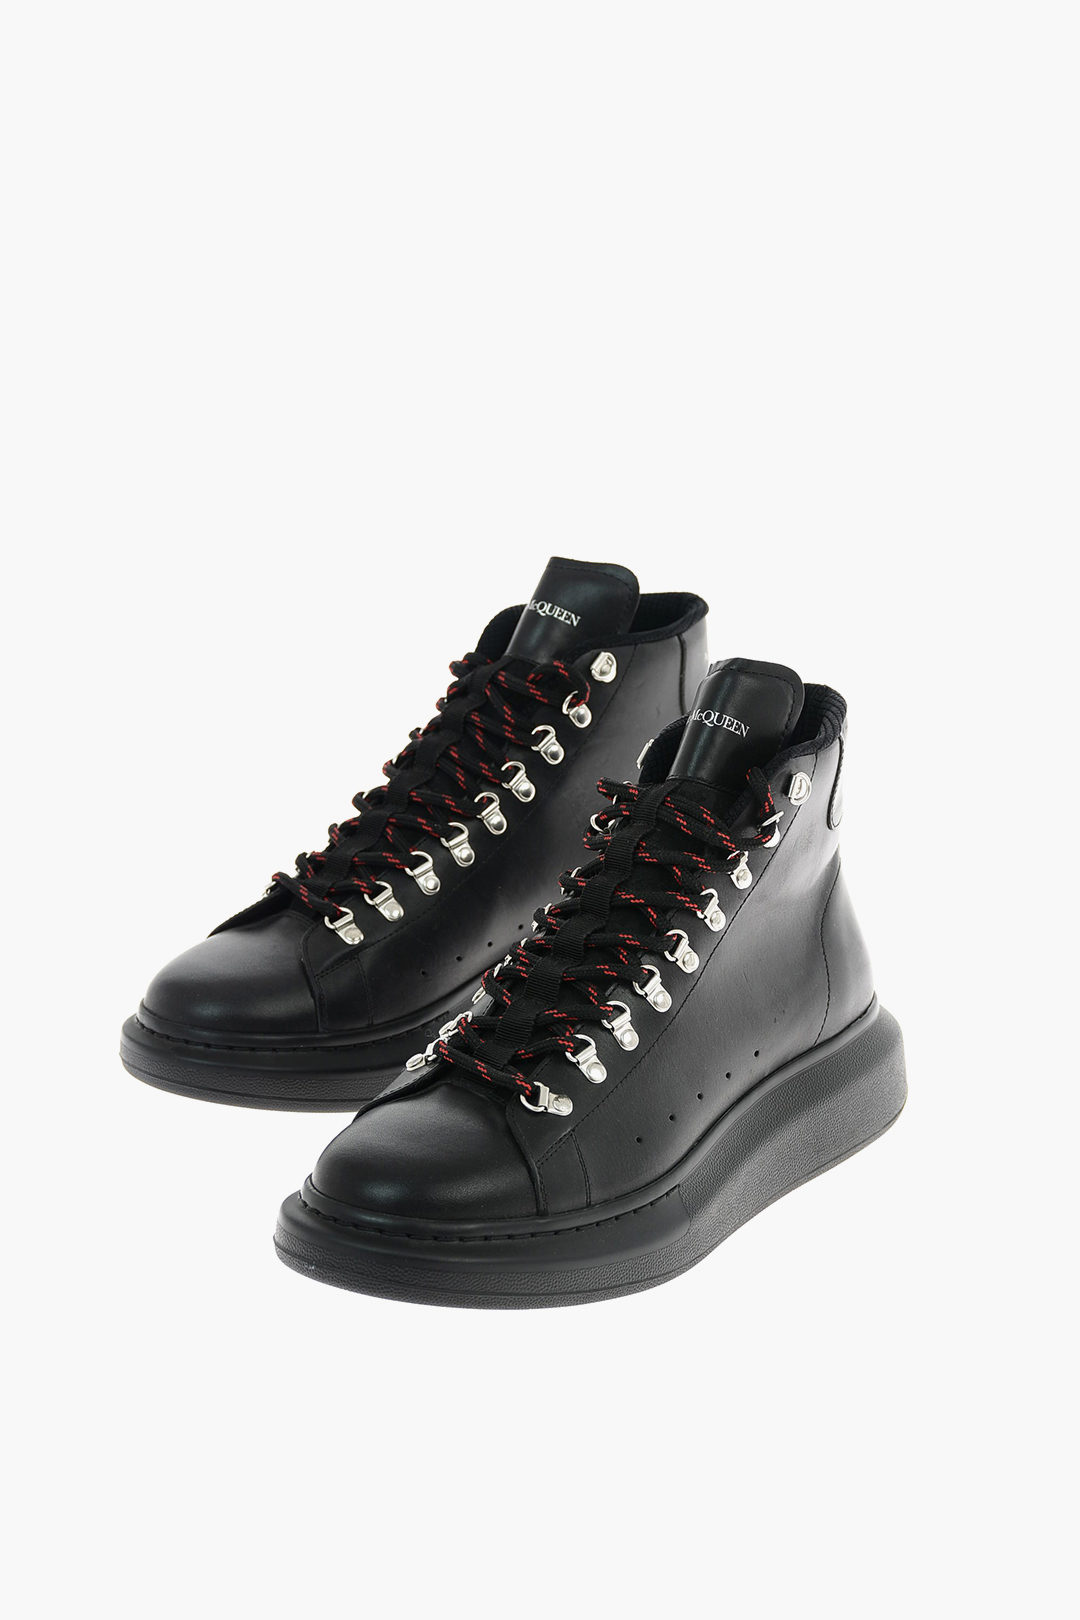 Ростислав | Mens alexander mcqueen sneakers outfit, Mens casual outfits  summer, Winter outfits men